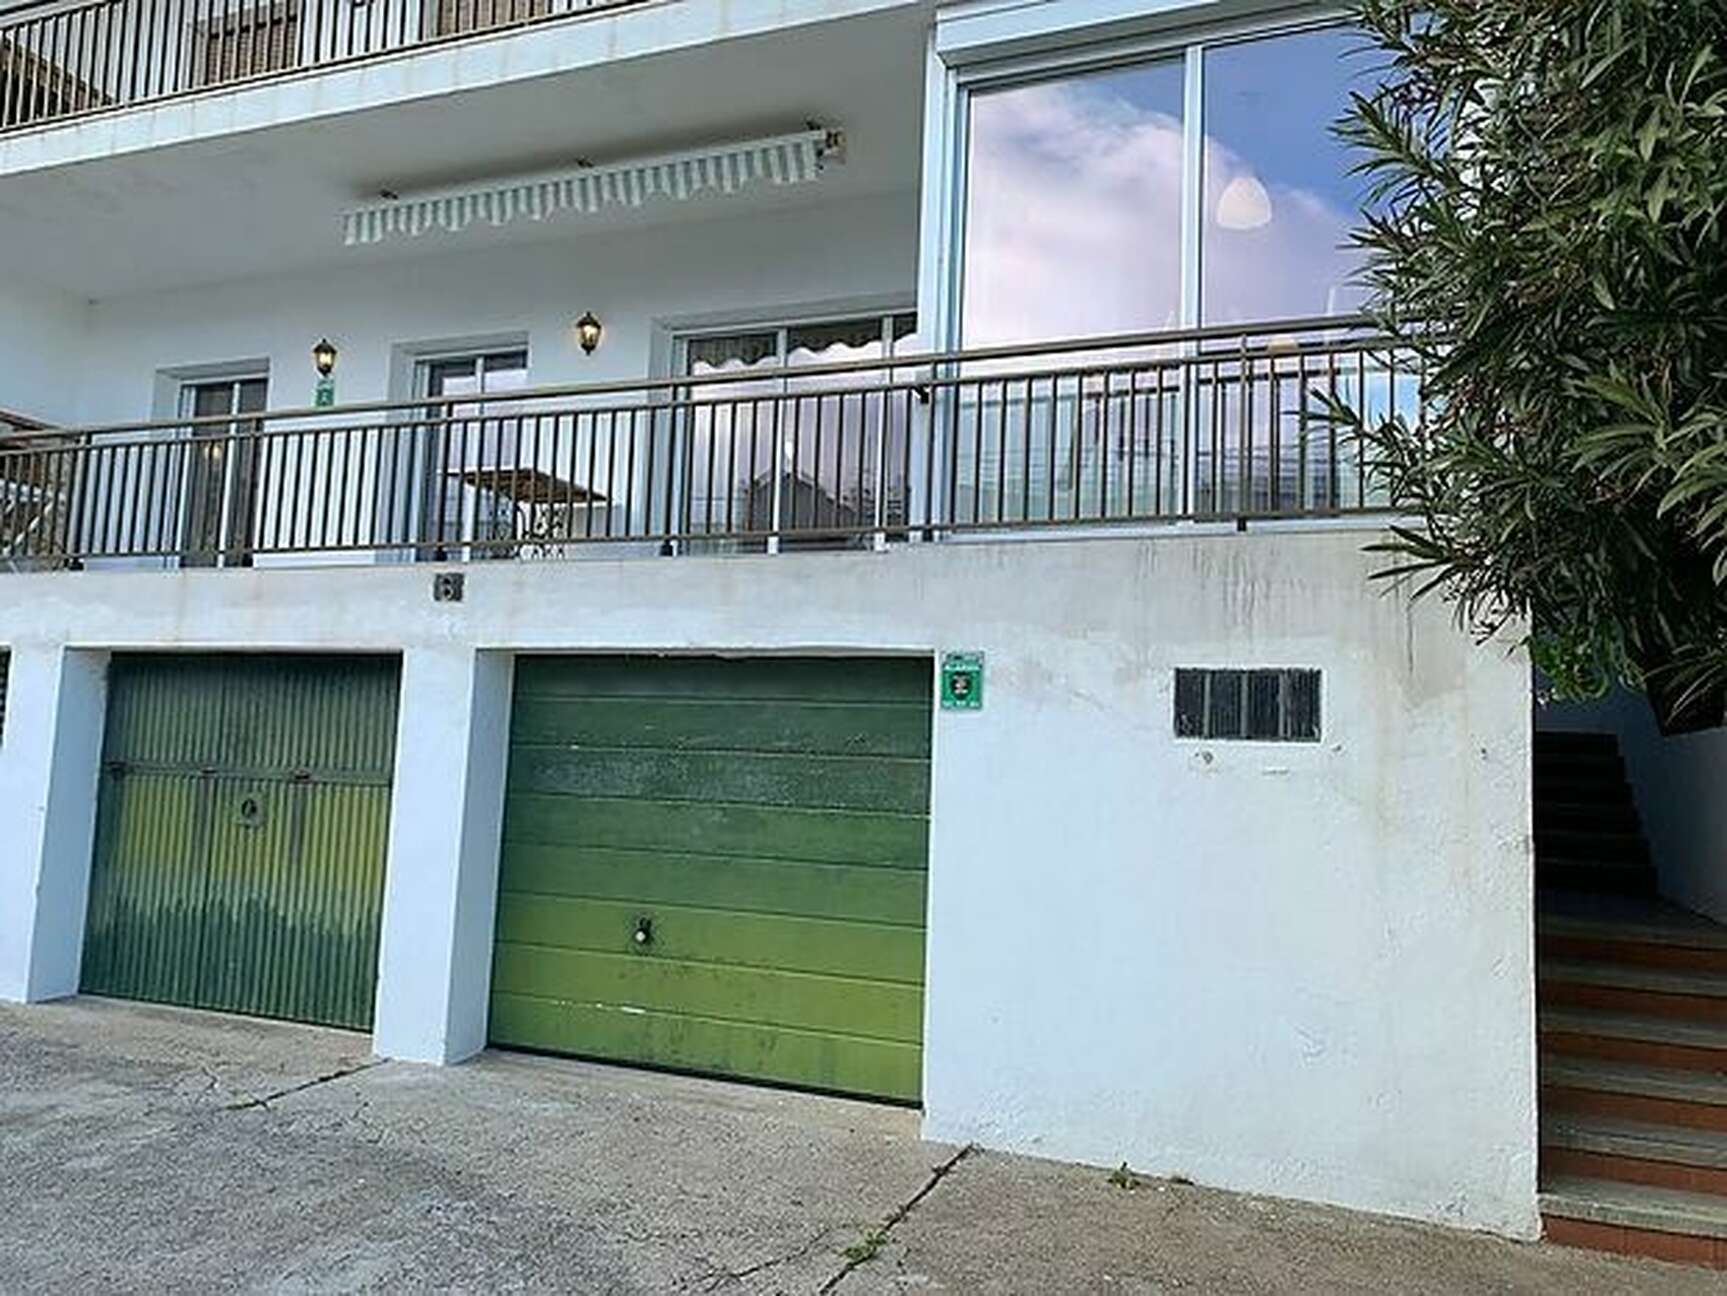 Semi-renovated apartment with sea views and with its closed garage